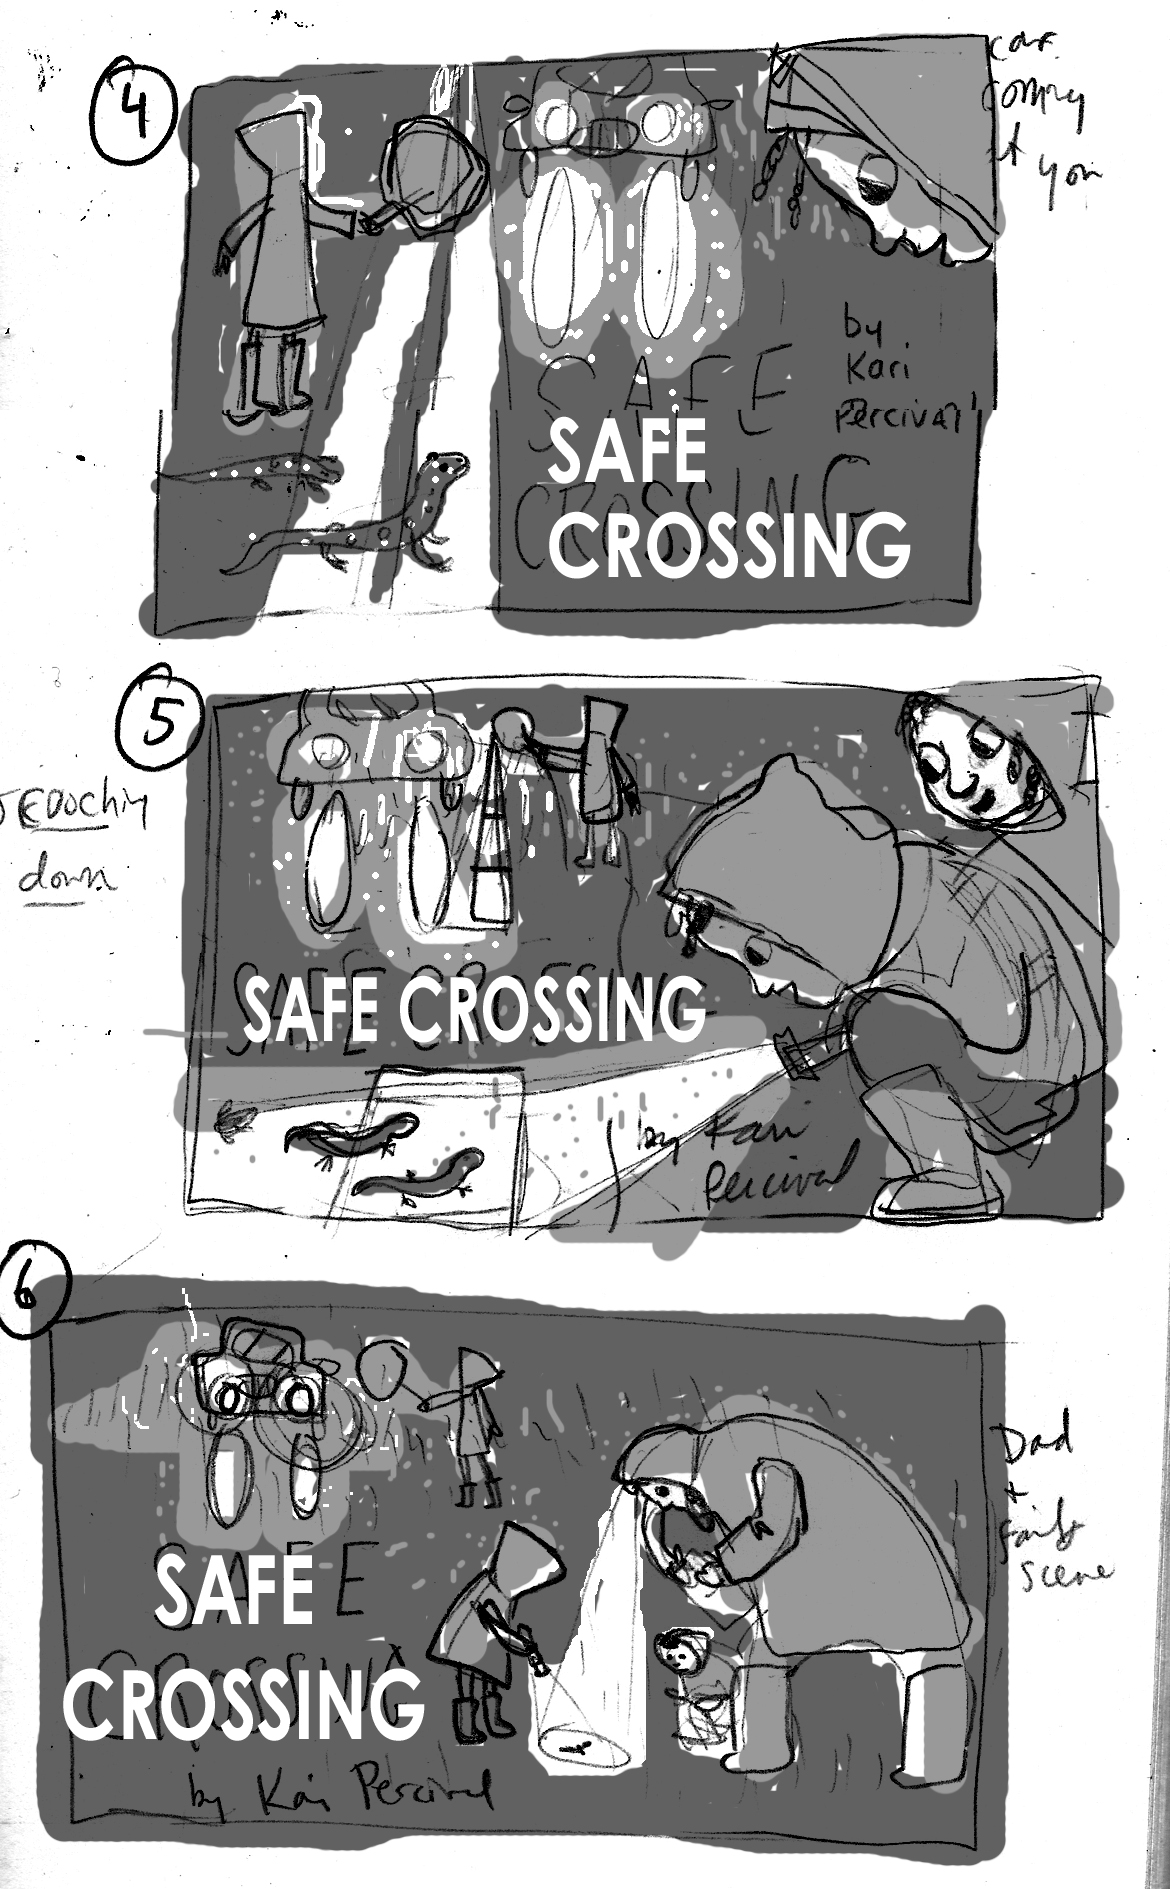 Safe_Crossing_Cover_sketches2:tones:flat